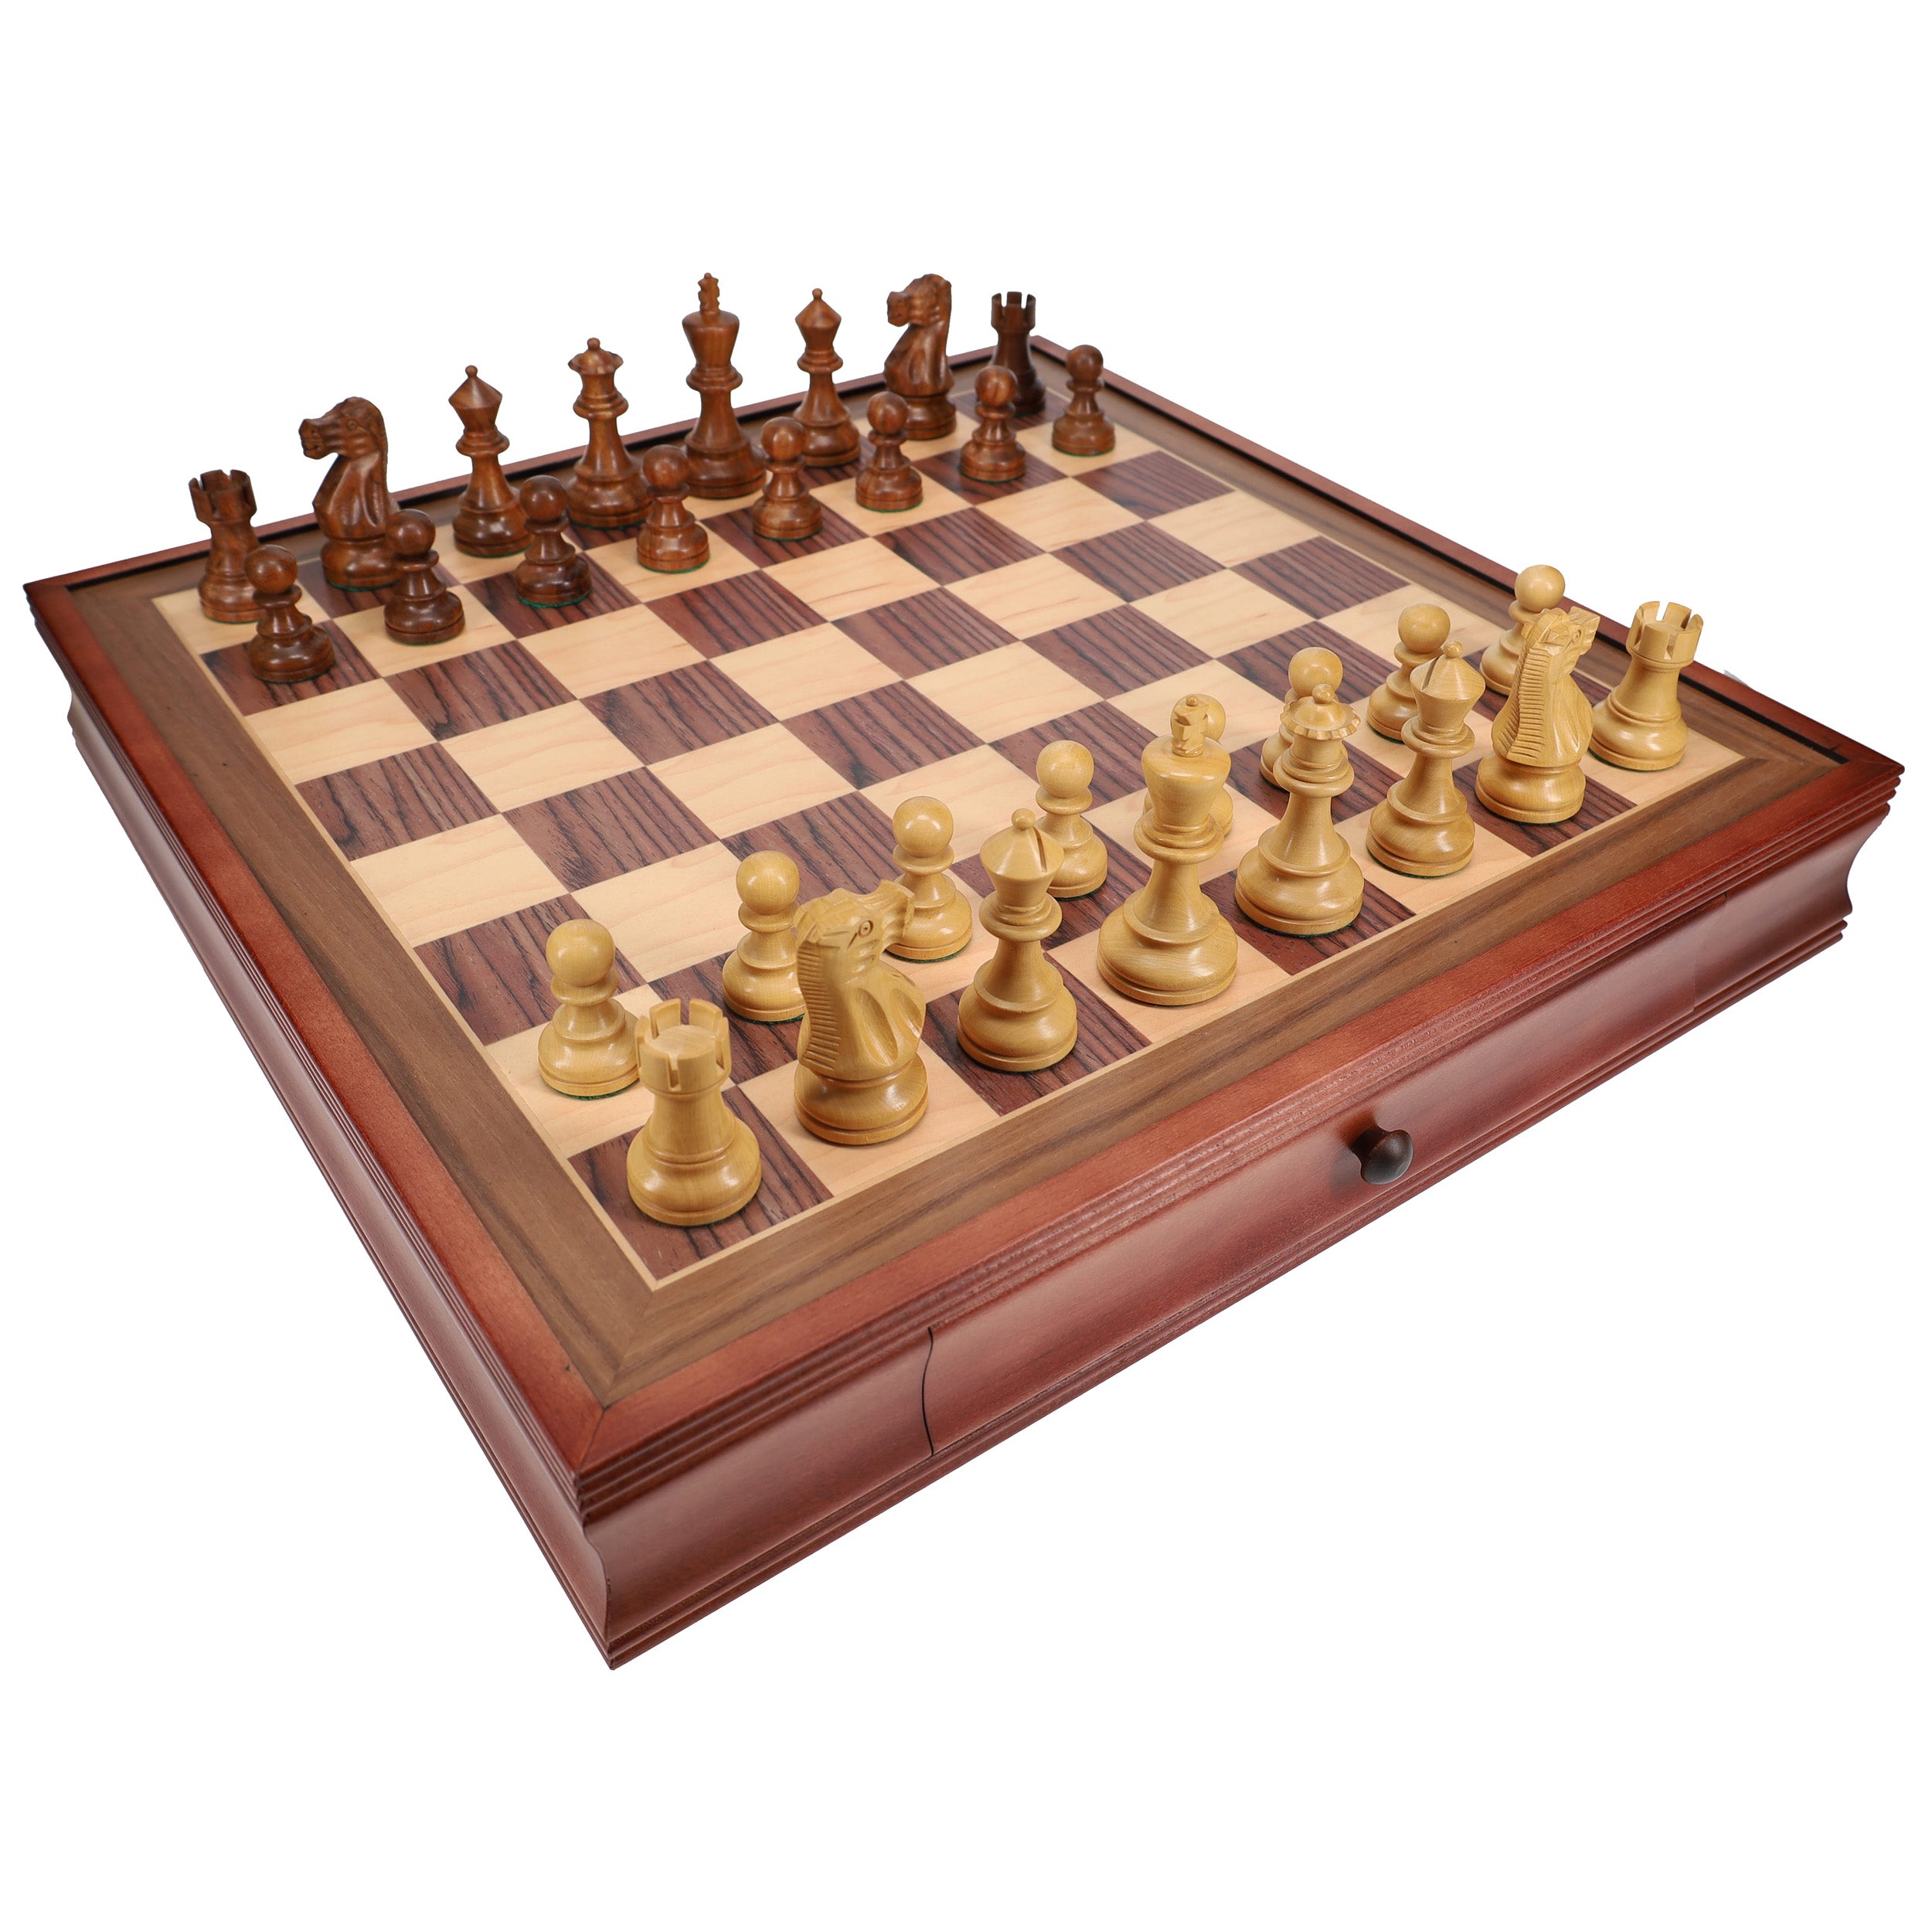 19" English Chess Set with Pull-out Storage Drawers - Brown - Chess Set - Chess-House